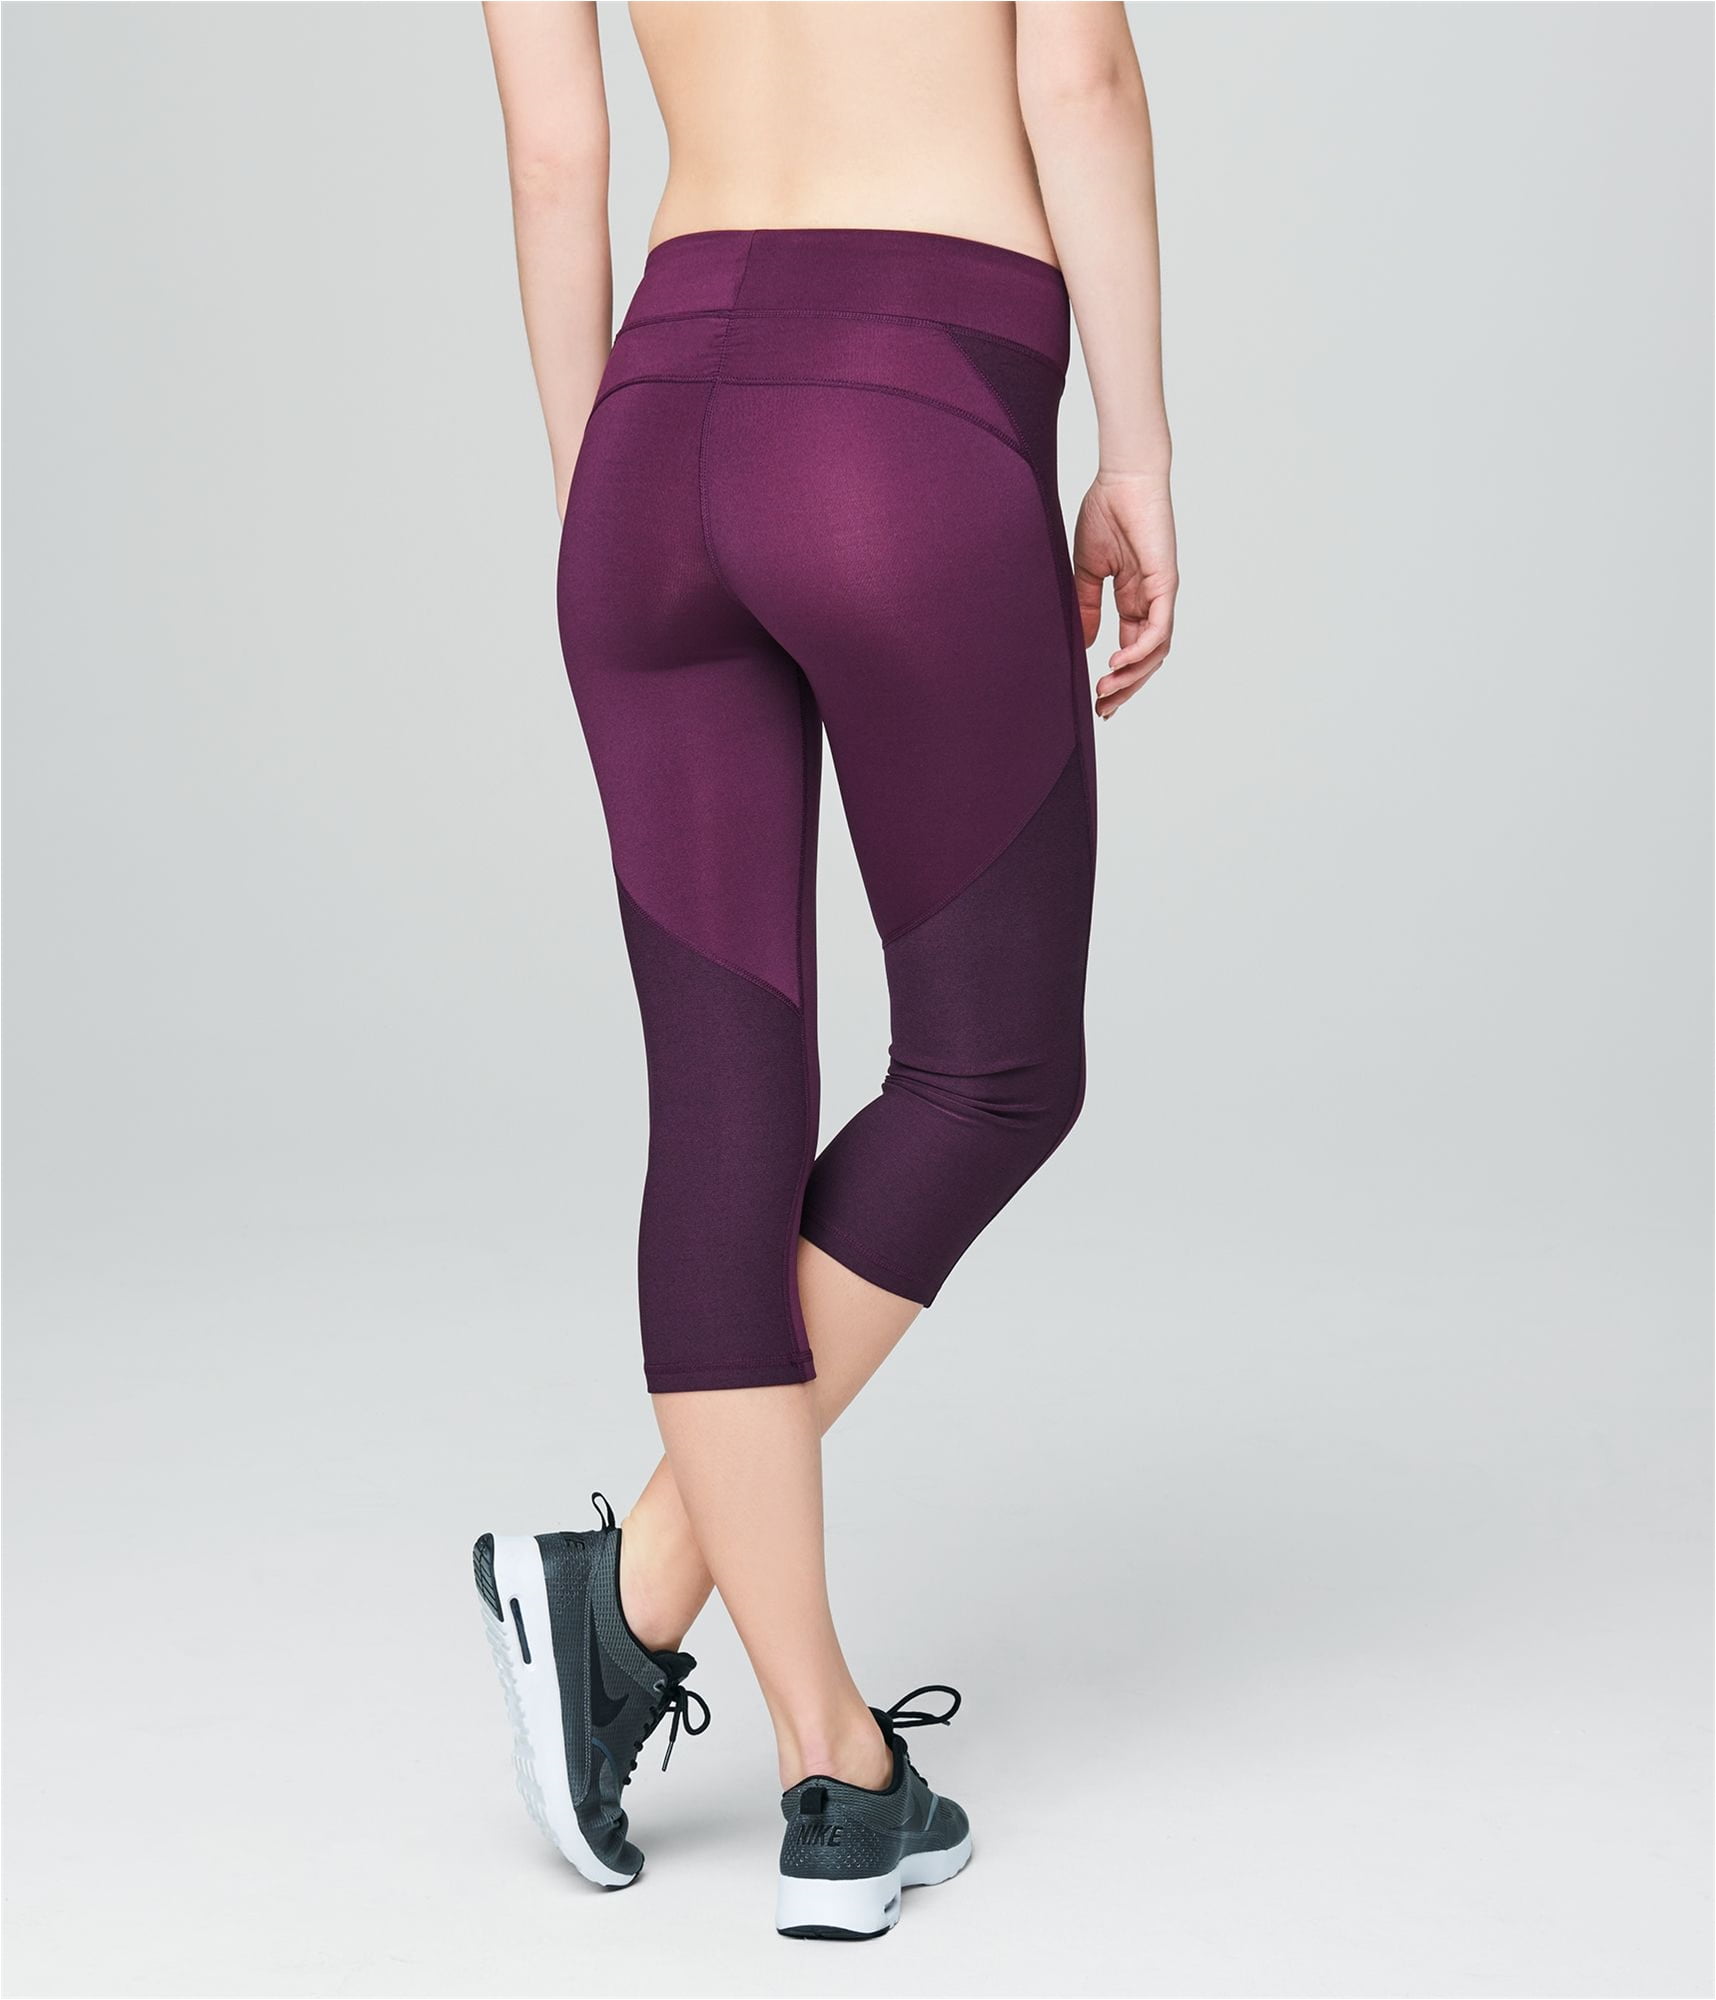 Cherry ChiChi - Our new ASSLESS YOGA PANTS! Feeling a